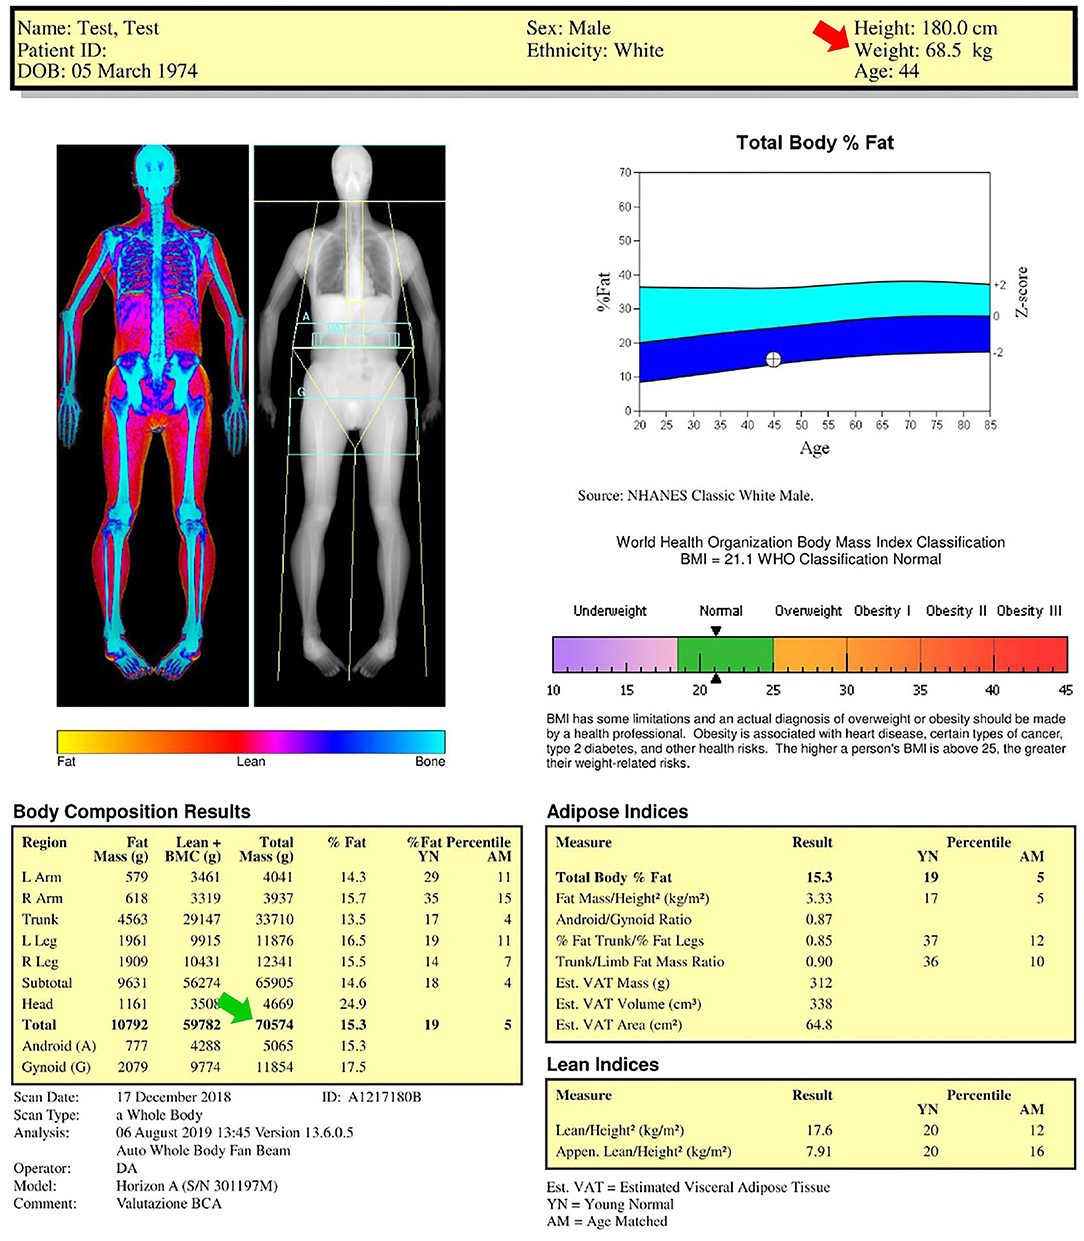 How Do DEXA Scans Work? The Science Behind Bone Mineral Density Tests